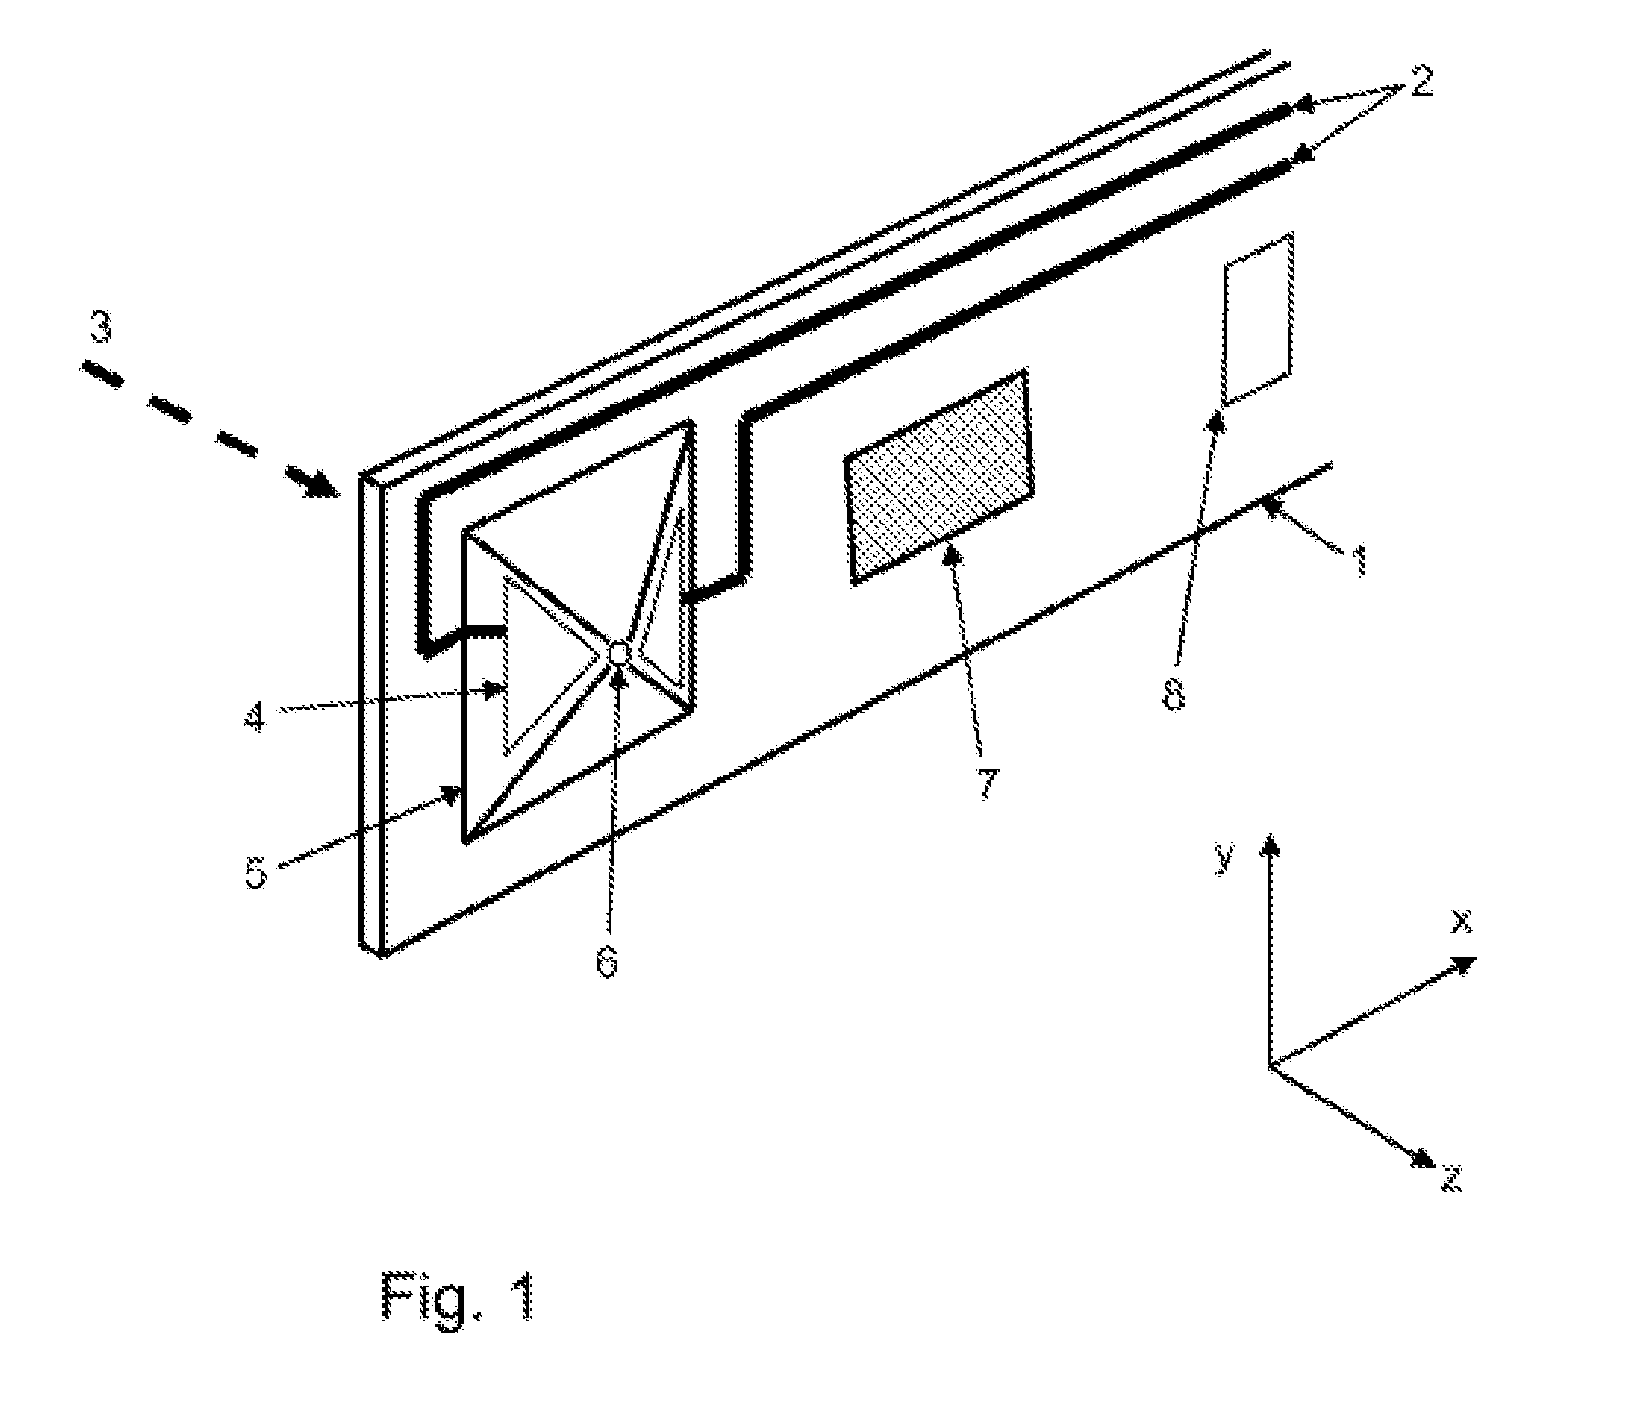 Device and method for an atomic force microscope for the study and modification of surface properties